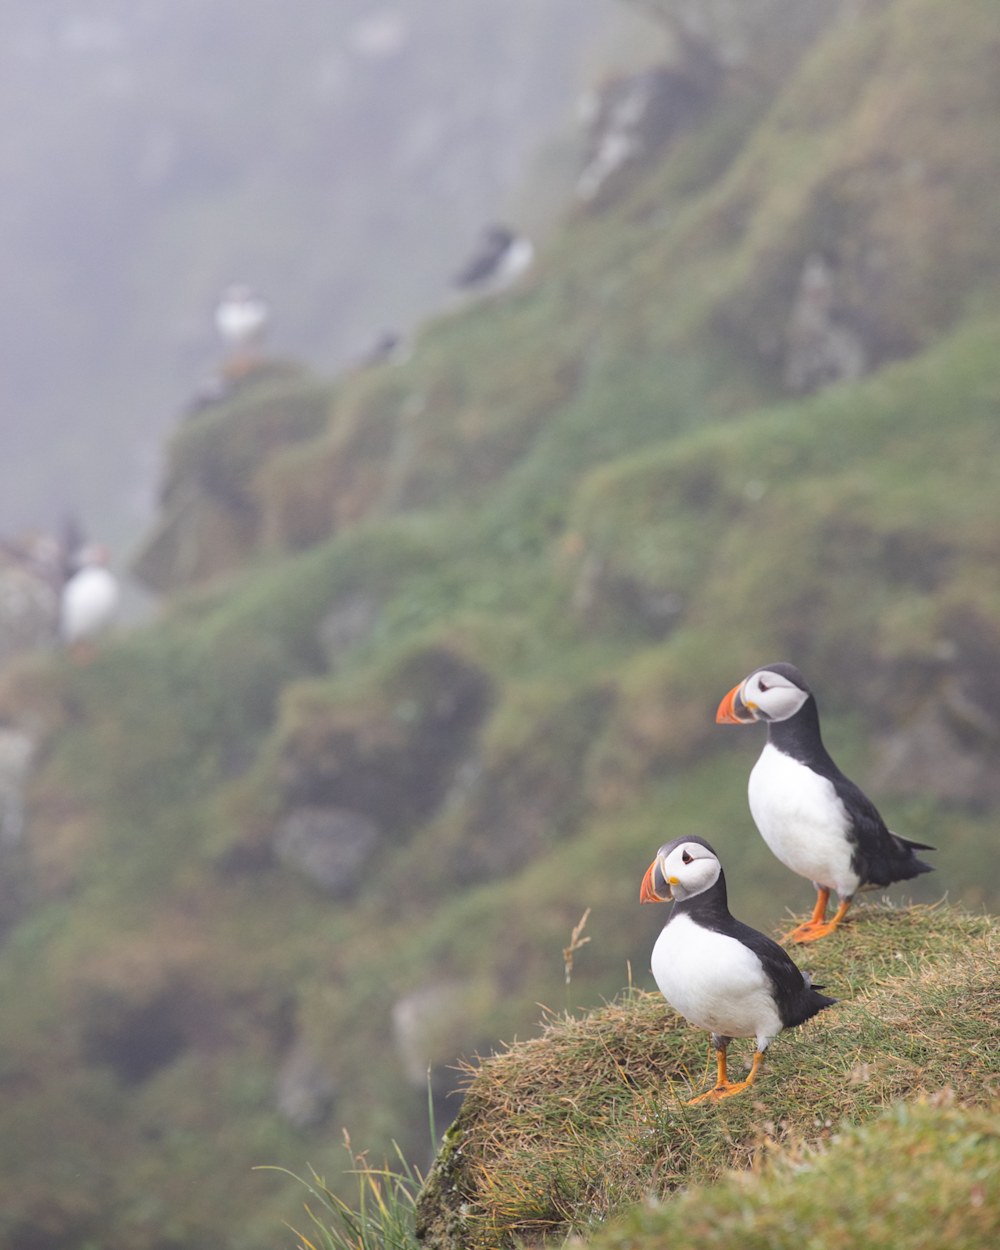 The Puffins on Mykines Island